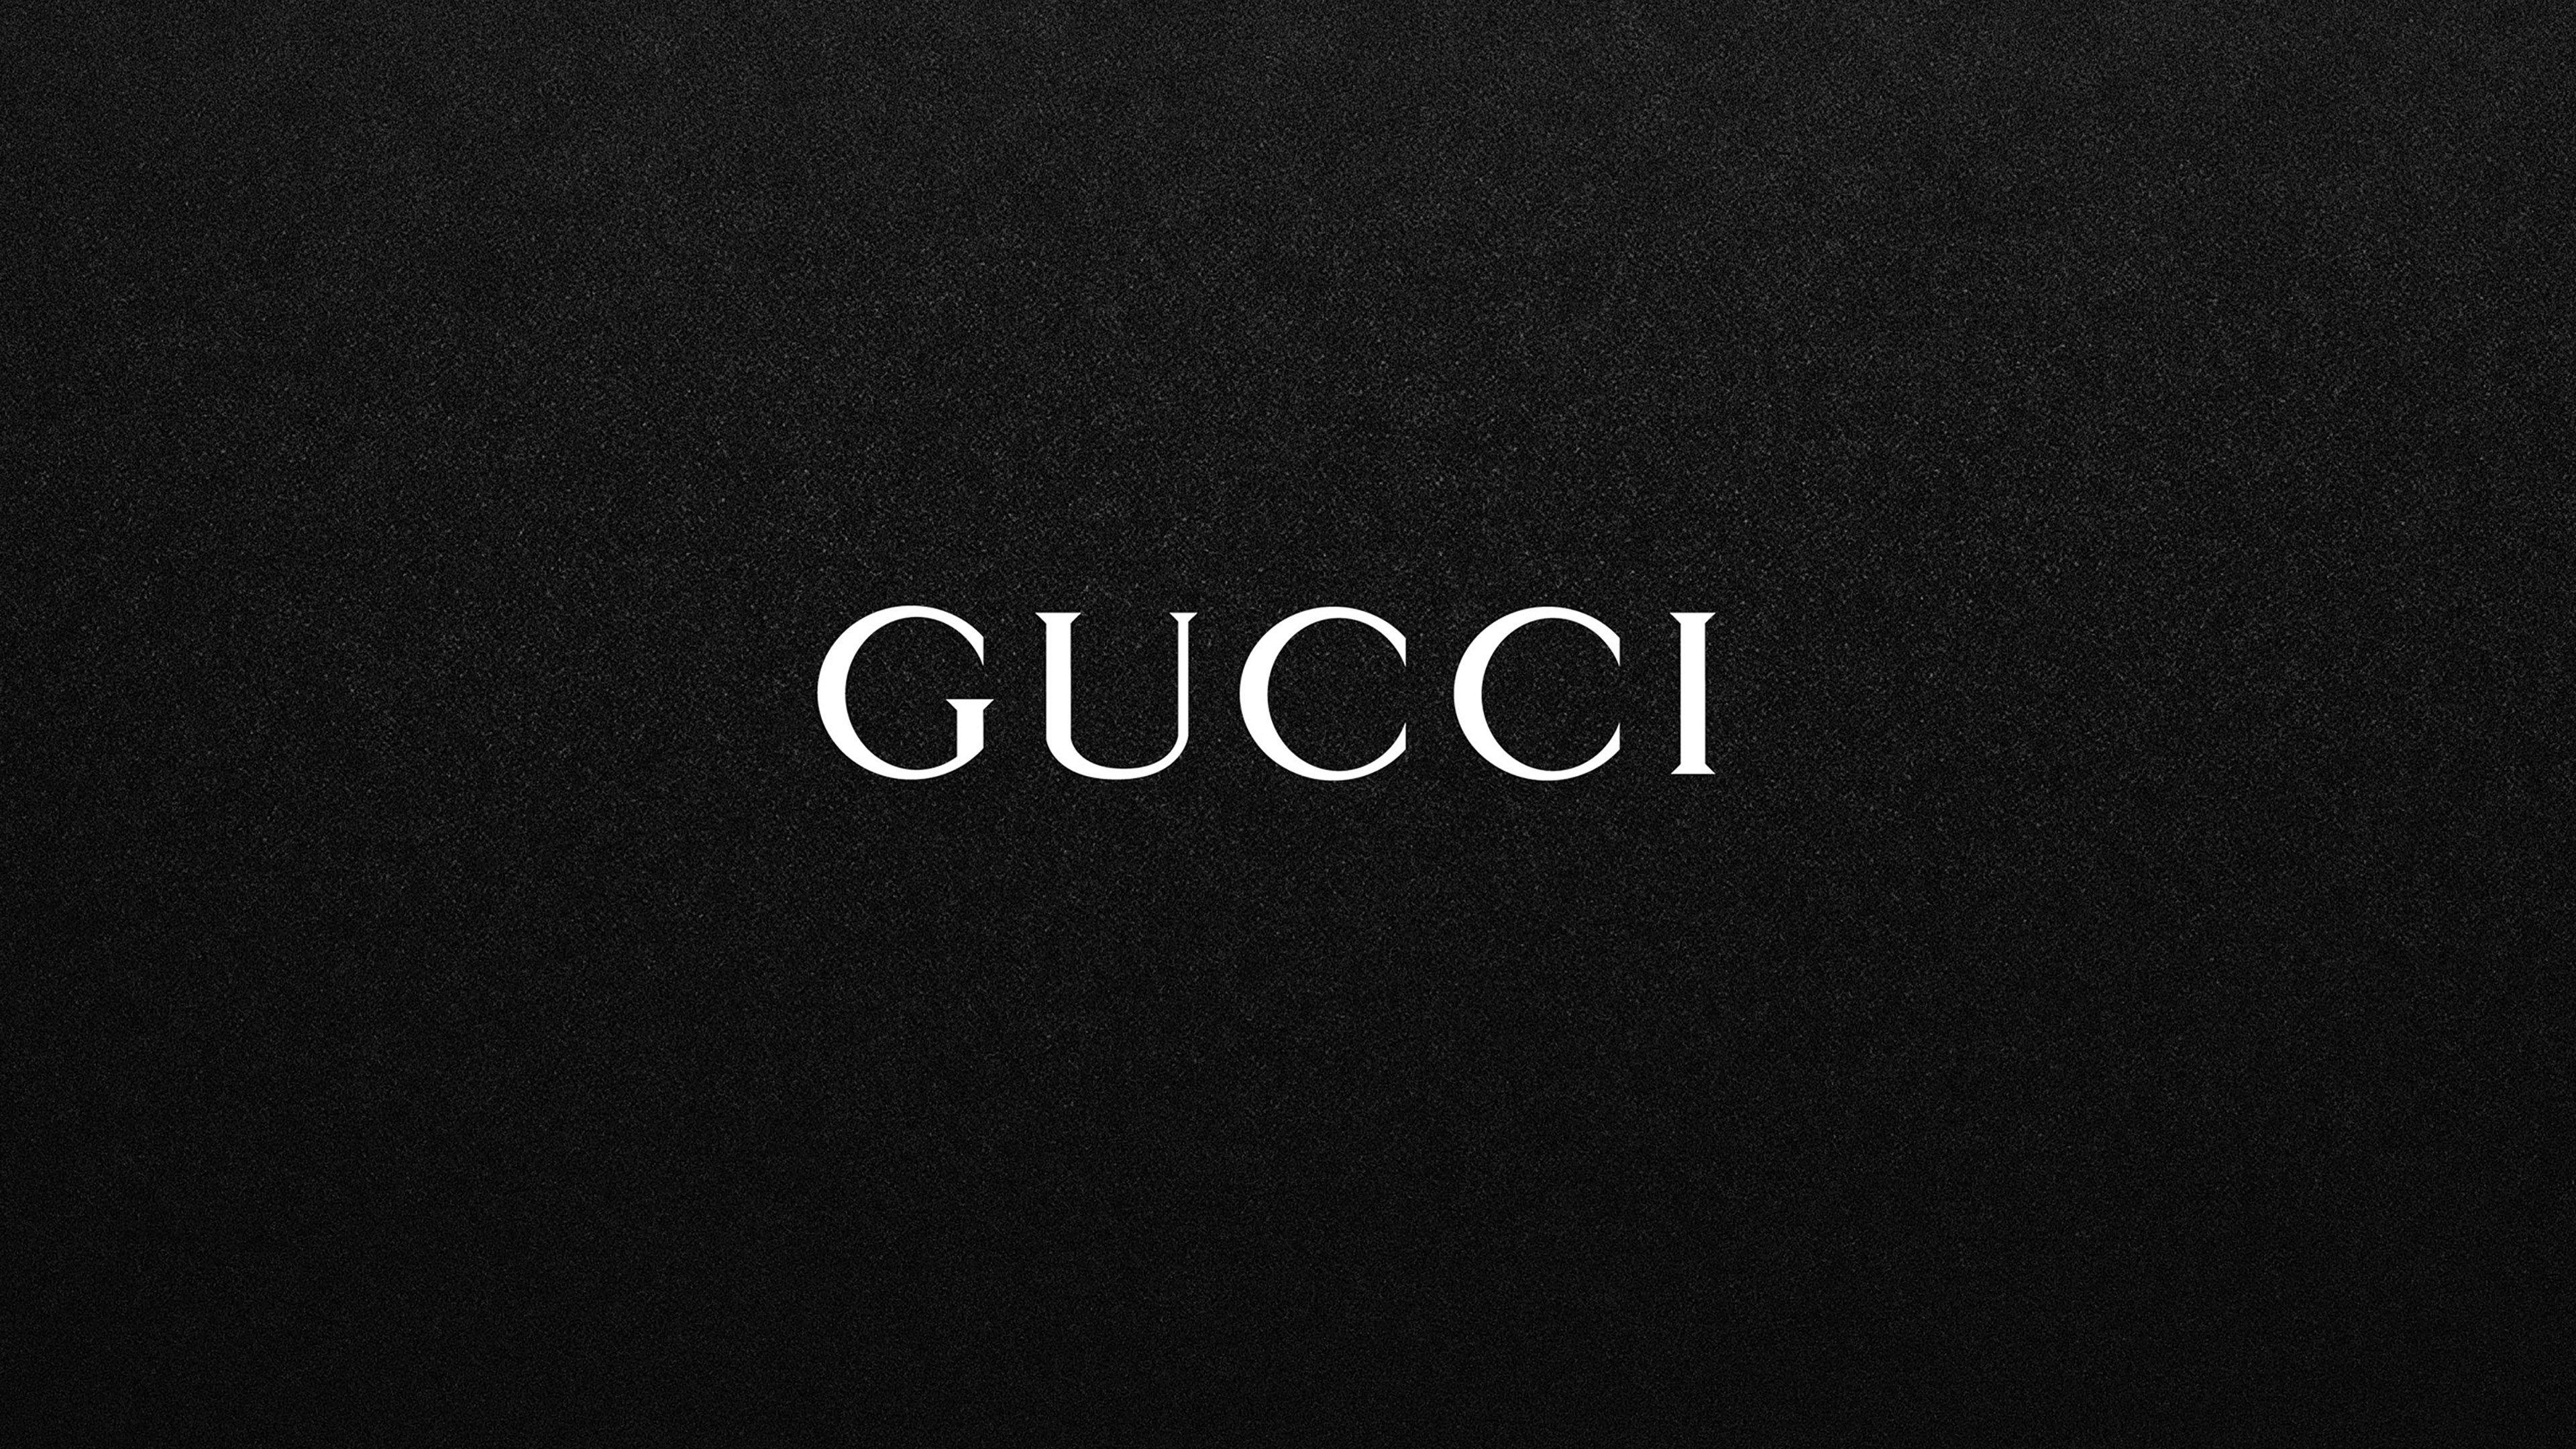 On Black Background iPhone Logo - ab58-wallpaper-gucci-black-logo - Papers.co